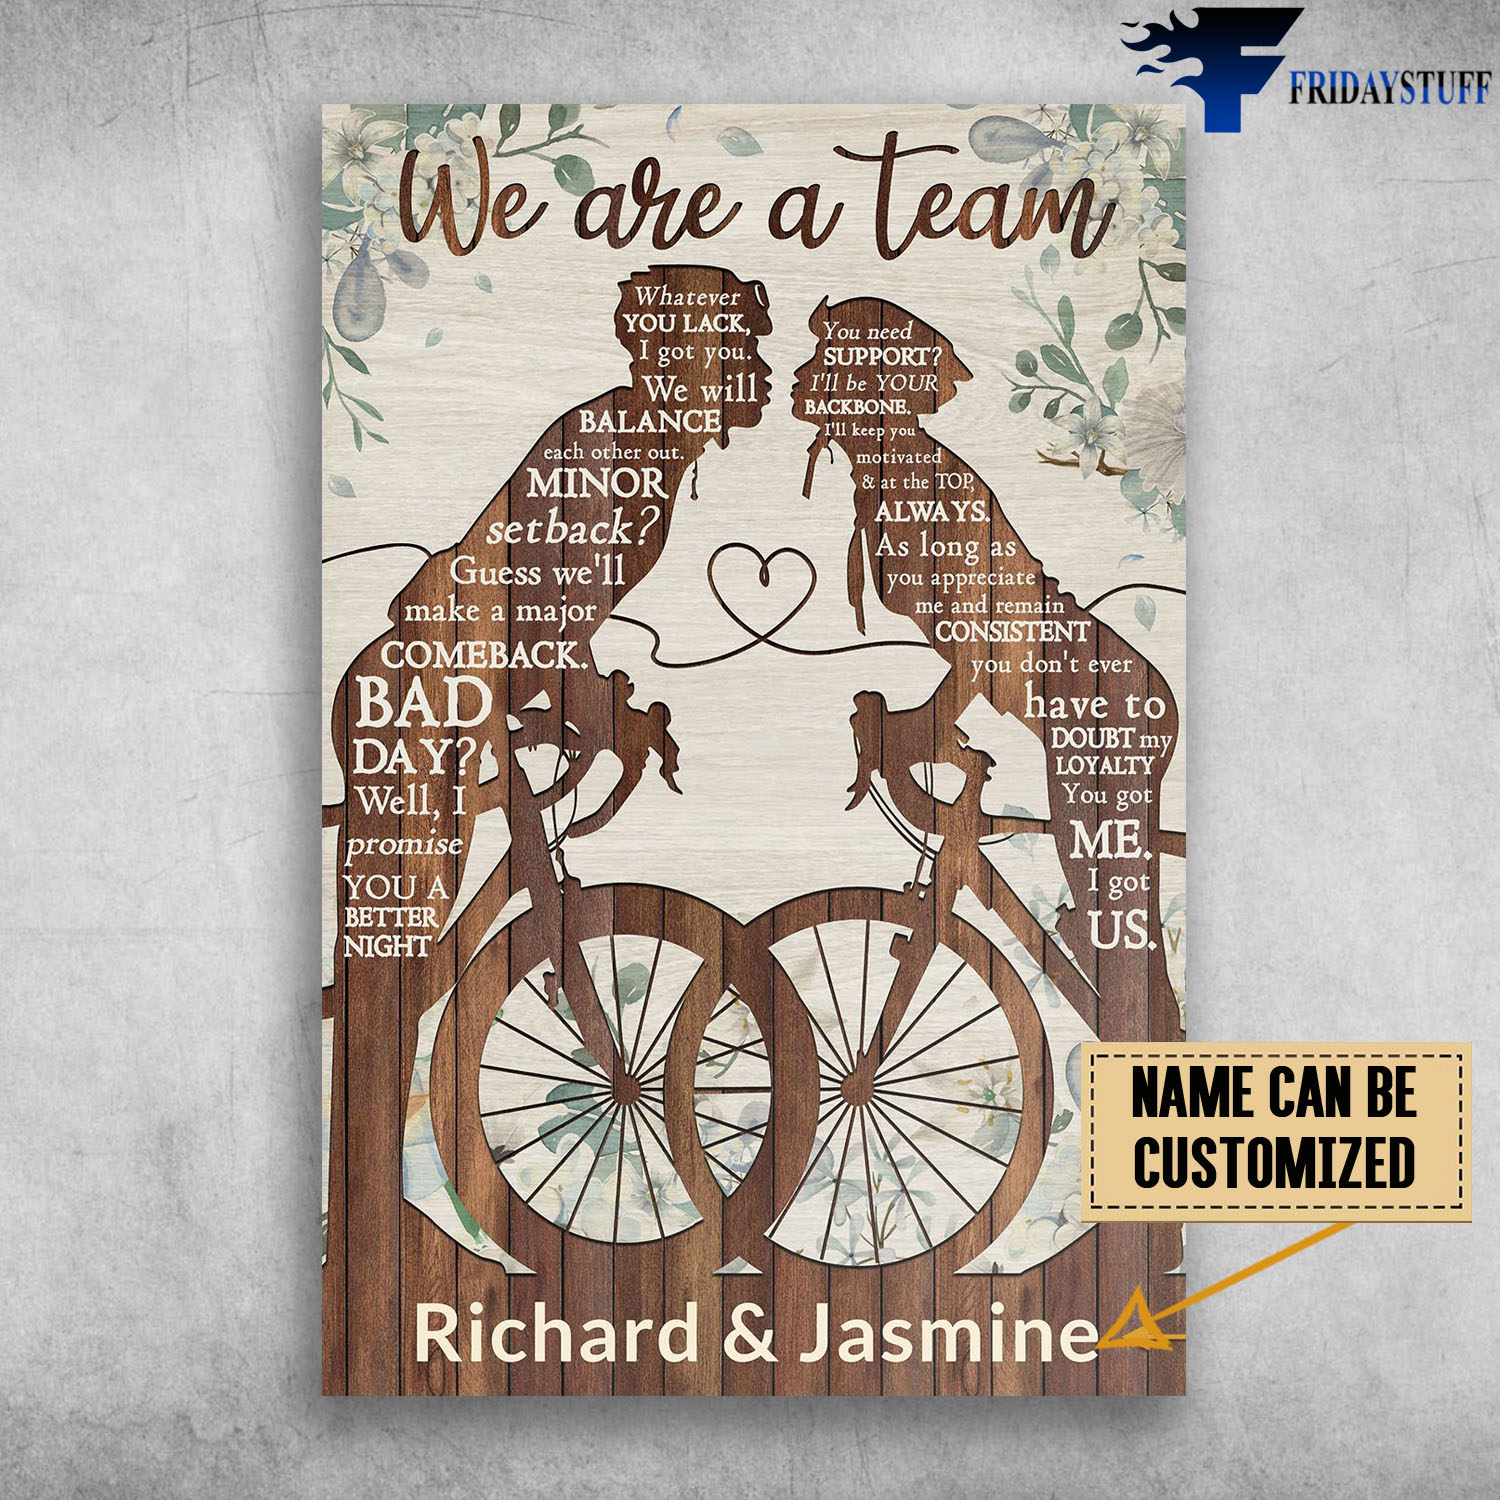 Cycling Couple, We Are A Team, Whatever You Lack, I Got You, We Will Balance Each Other Out, Minor Setback, Guess We’ll Make A Major Comeback, Bad Day, Well, I Promise You A Better Night, You Need Support, I’ll Be Your Backbone